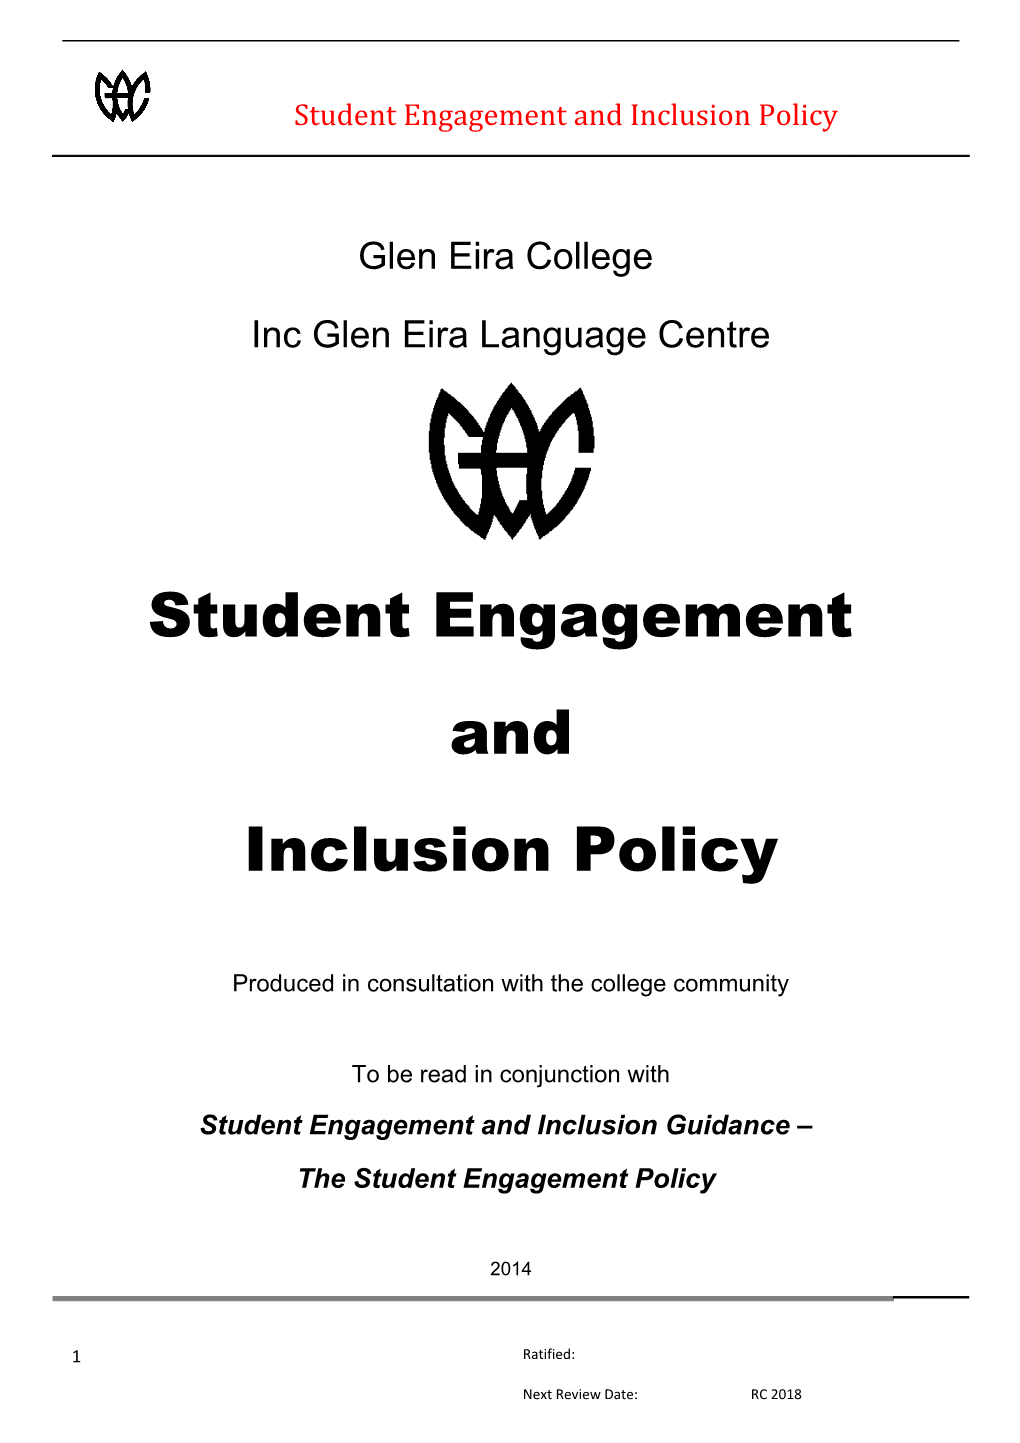 Student Engagement and Inclusion Policy